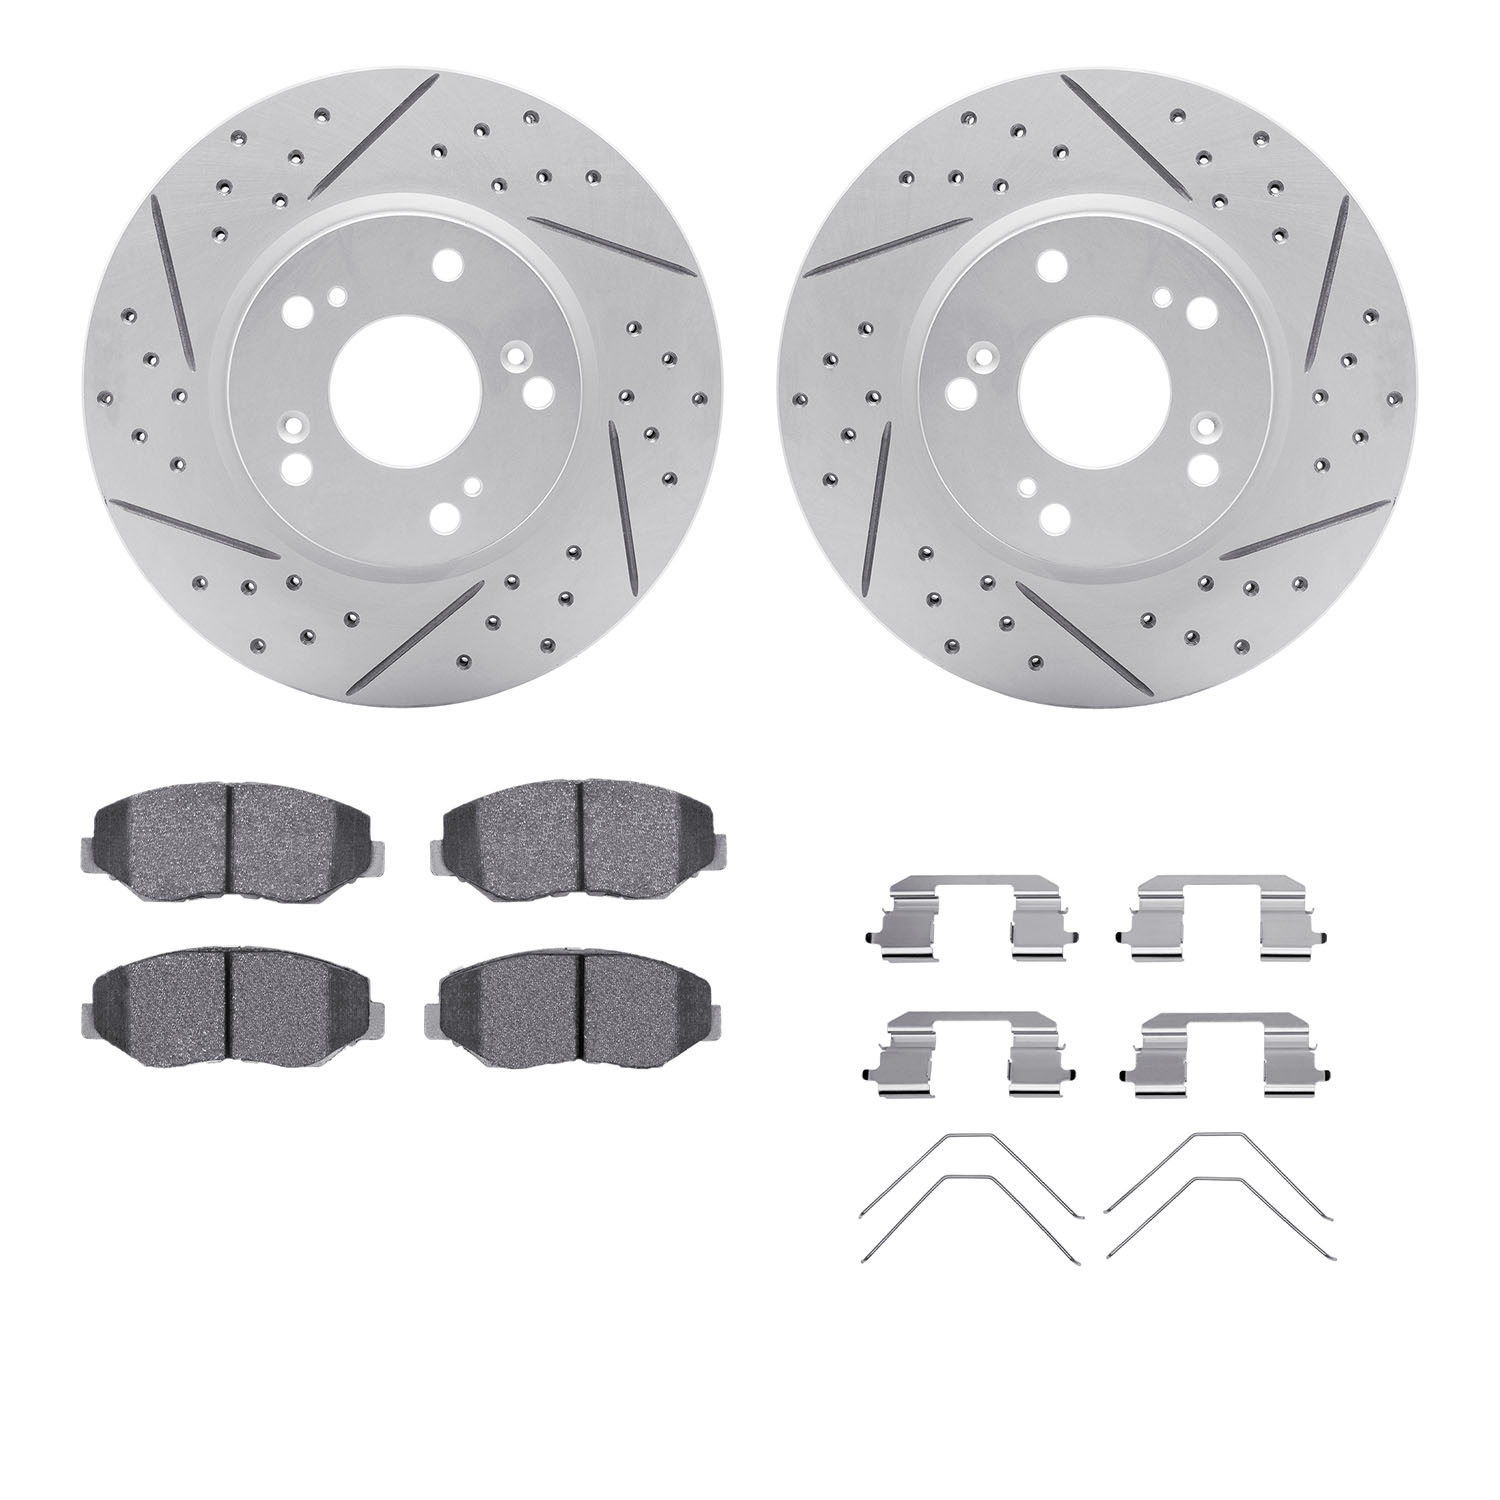 2512-59036 Geoperformance Drilled/Slotted Rotors w/5000 Advanced Brake Pads Kit & Hardware, 2013-2014 Acura/Honda, Position: Fro